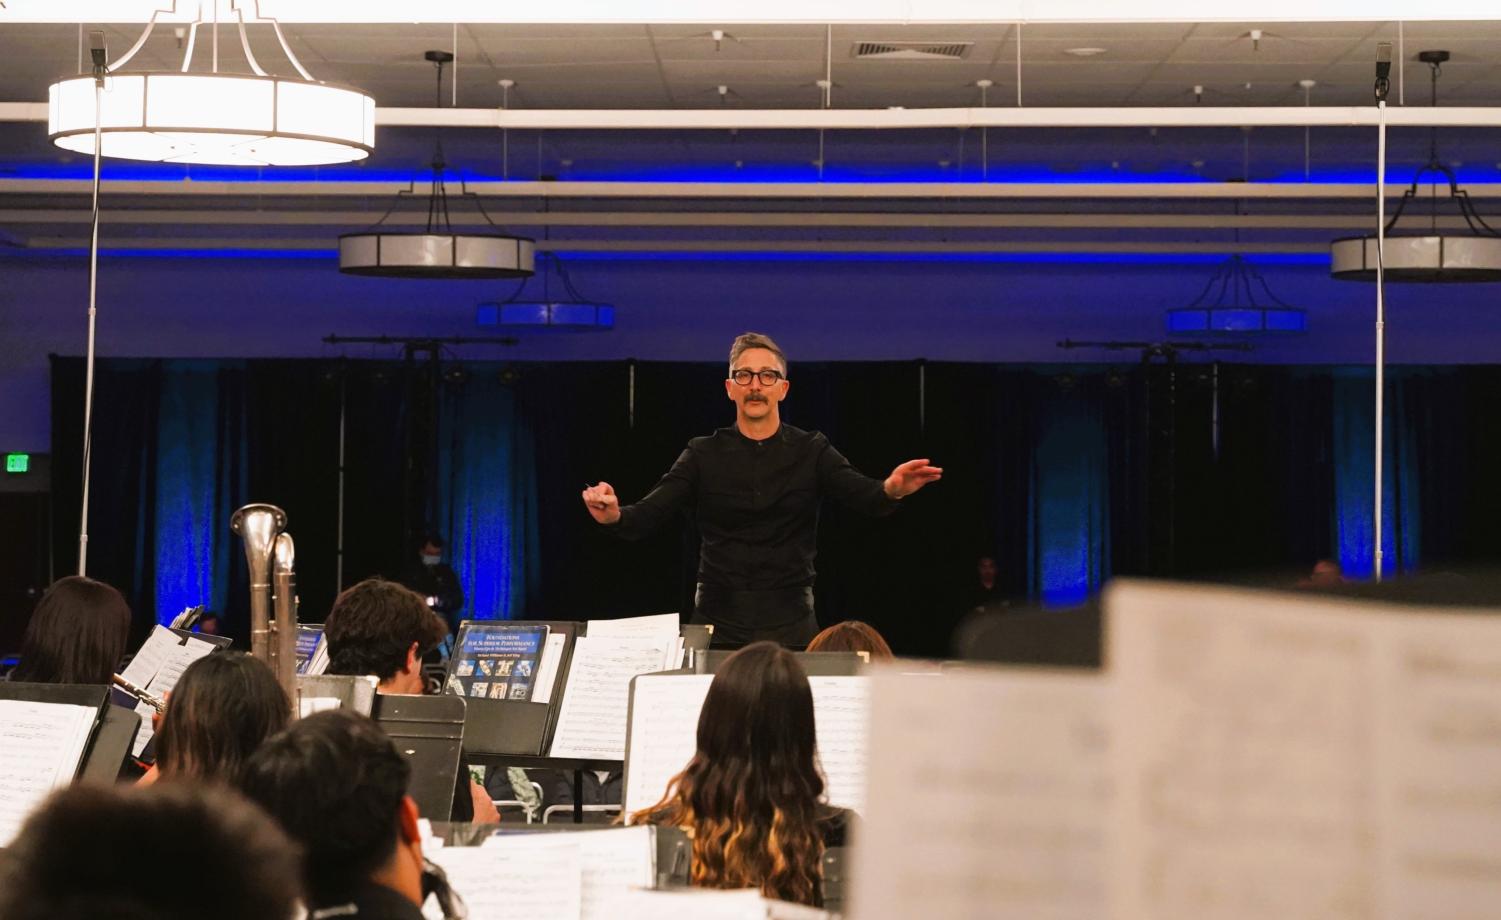 Wind+1+performs+at+California+All+State+Music+Educators+Conference